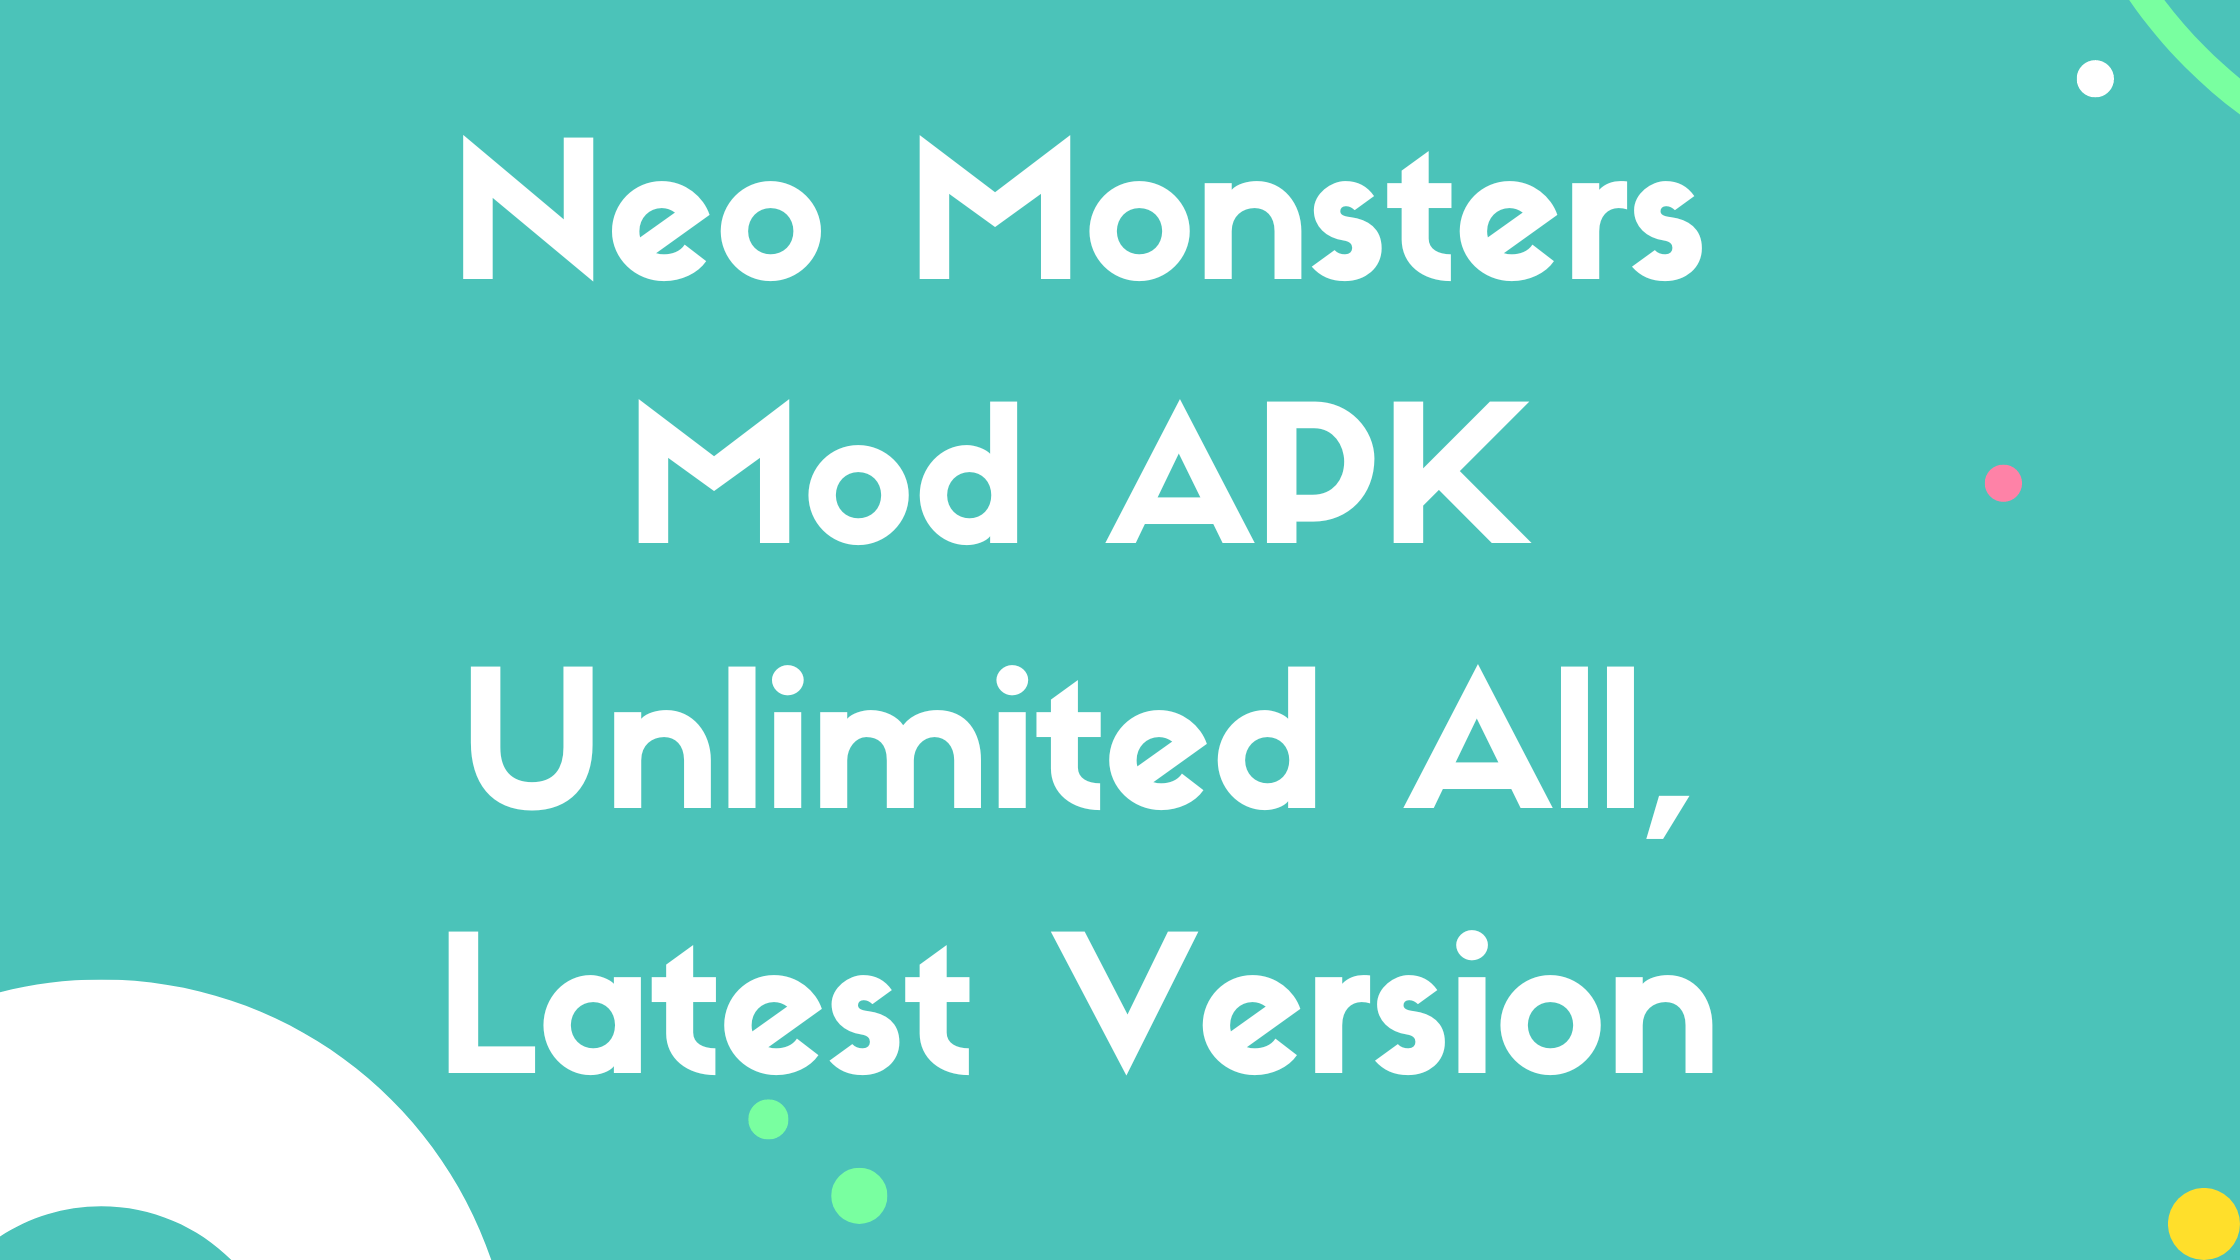 Neo Monsters Mod APK Unlimited All, Latest Version